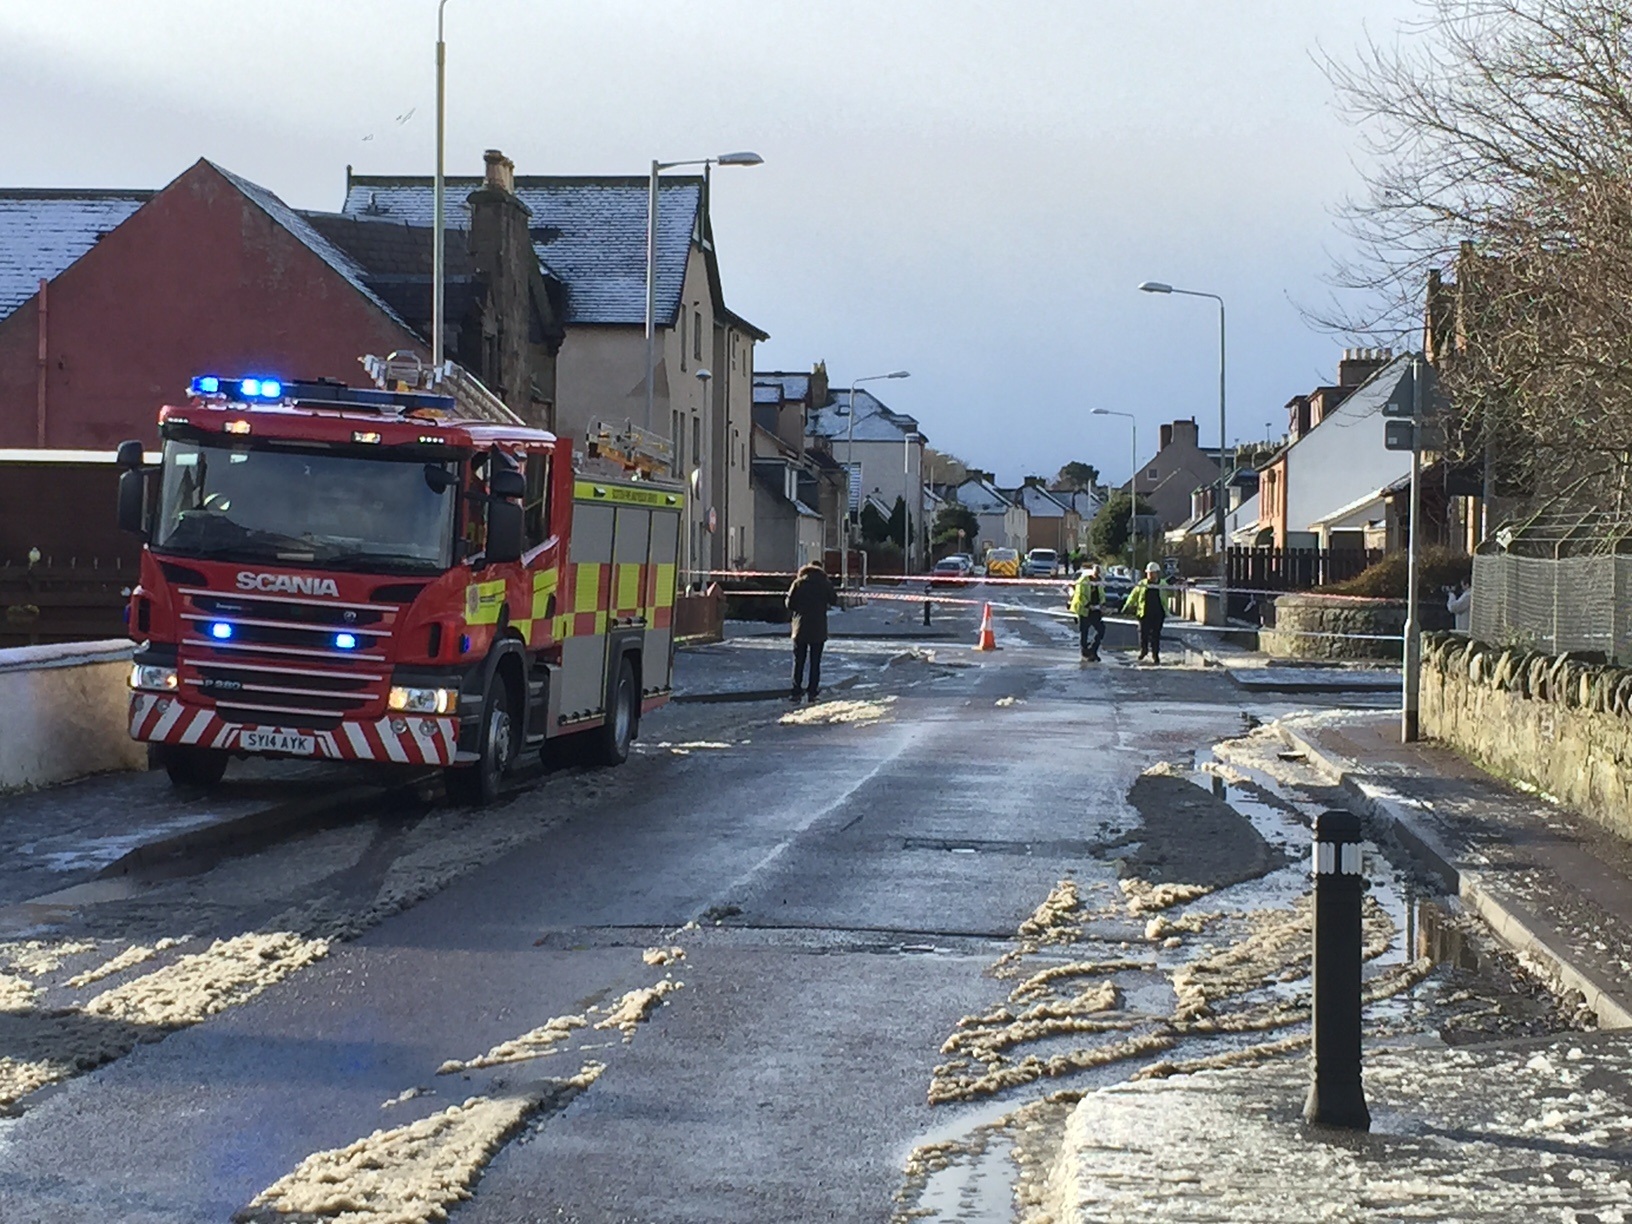 Fire services at the scene in Inverness